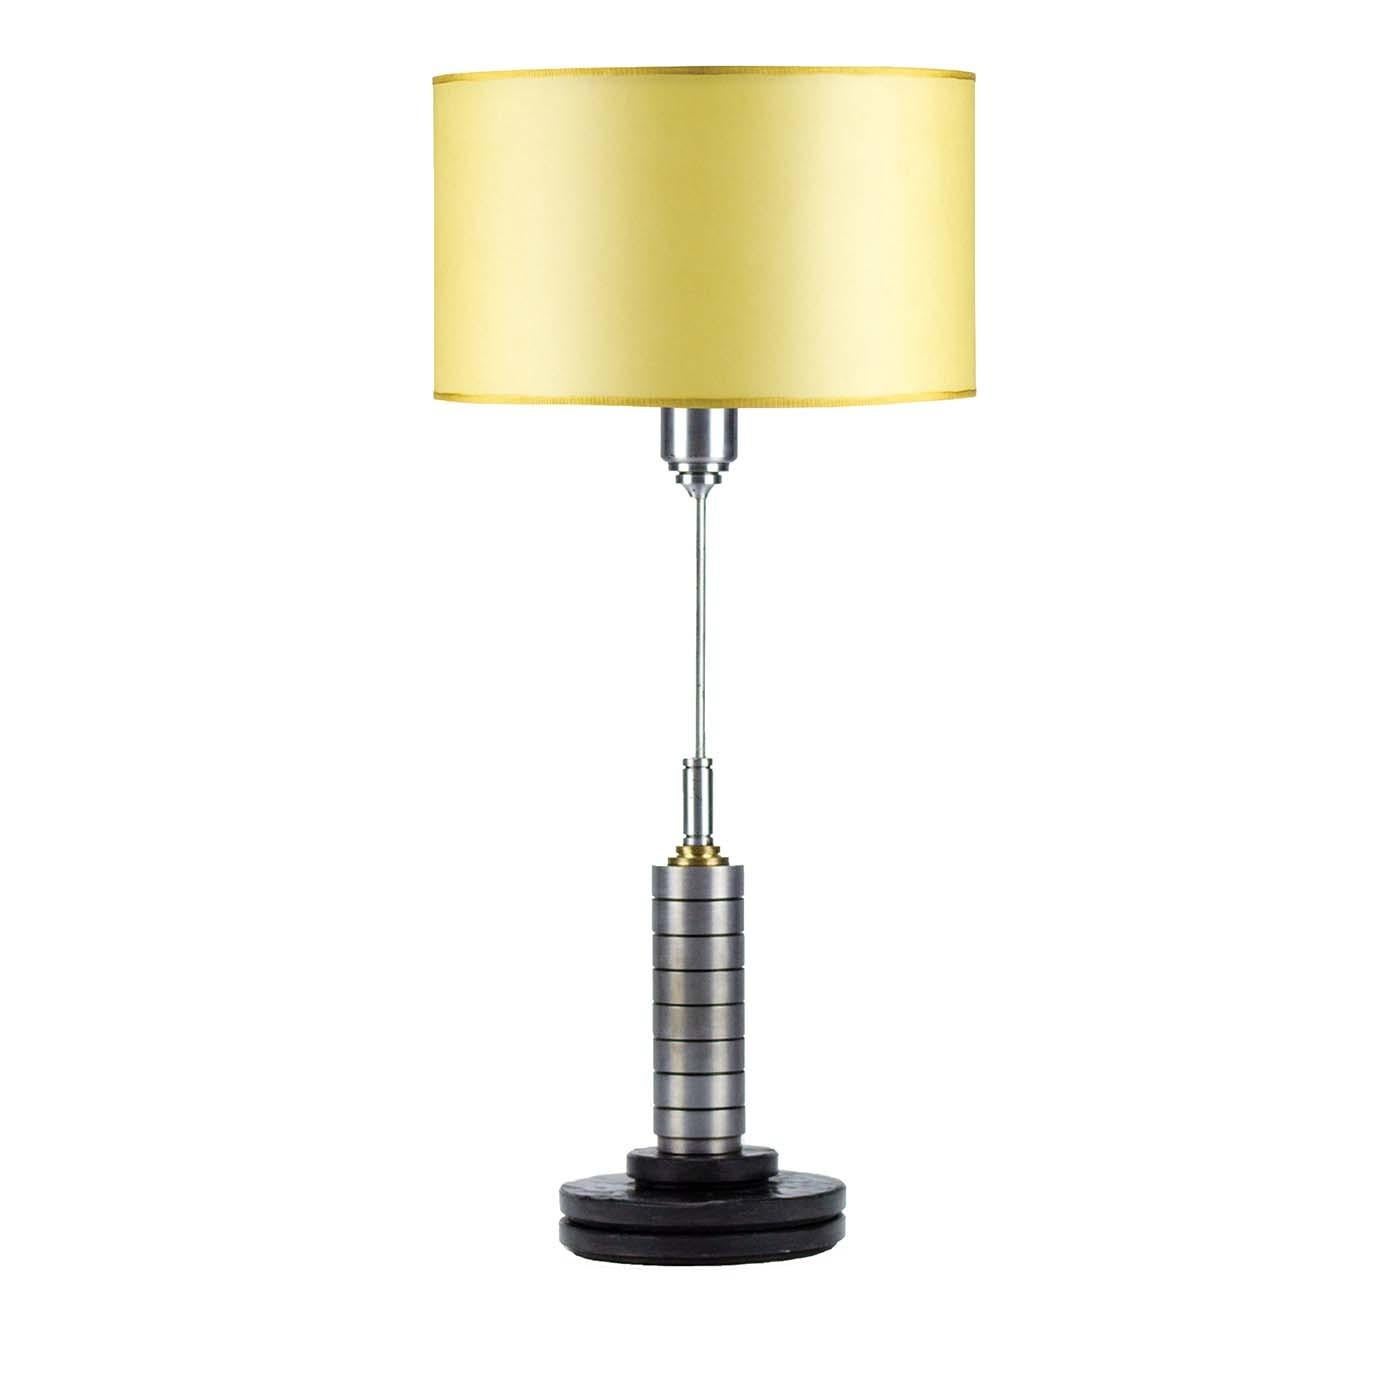 Simple and striking, the round Matrix marble base is the perfect support for the slender steel structure of this refined abat-jour. A decorative cylindrical element with a brass-colored top embellishes the lower part of the stem, while the top